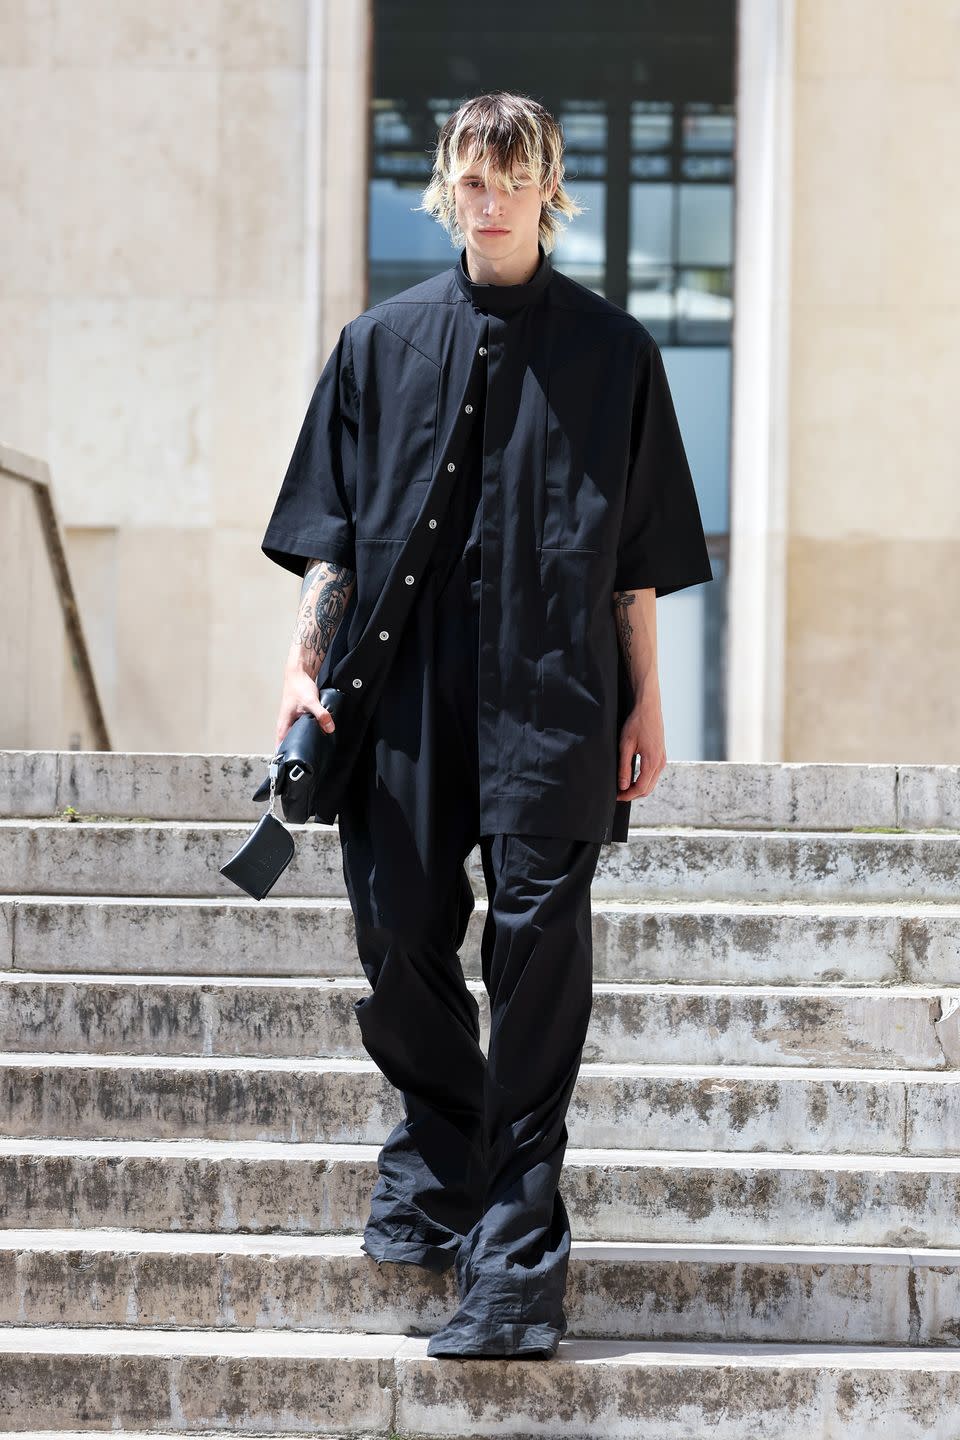 paris, france june 23 editorial use only for non editorial use please seek approval from fashion house a model walks the runway during the rick owens menswear spring summer 2023 show as part of paris fashion week on june 23, 2022 in paris, france photo by peter whitegetty images